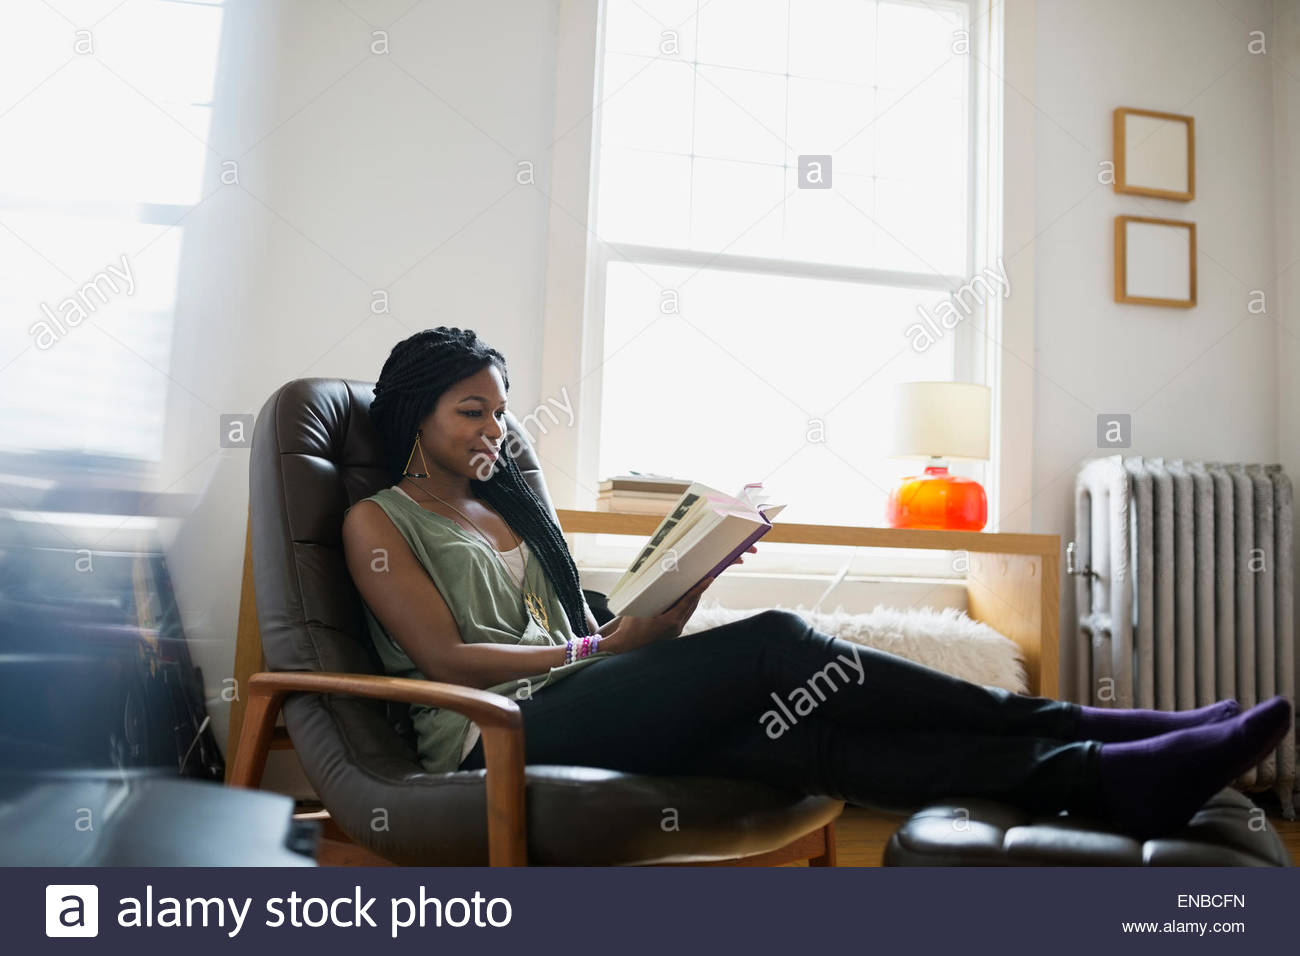 Woman reading book with feet up living room Stock Photo